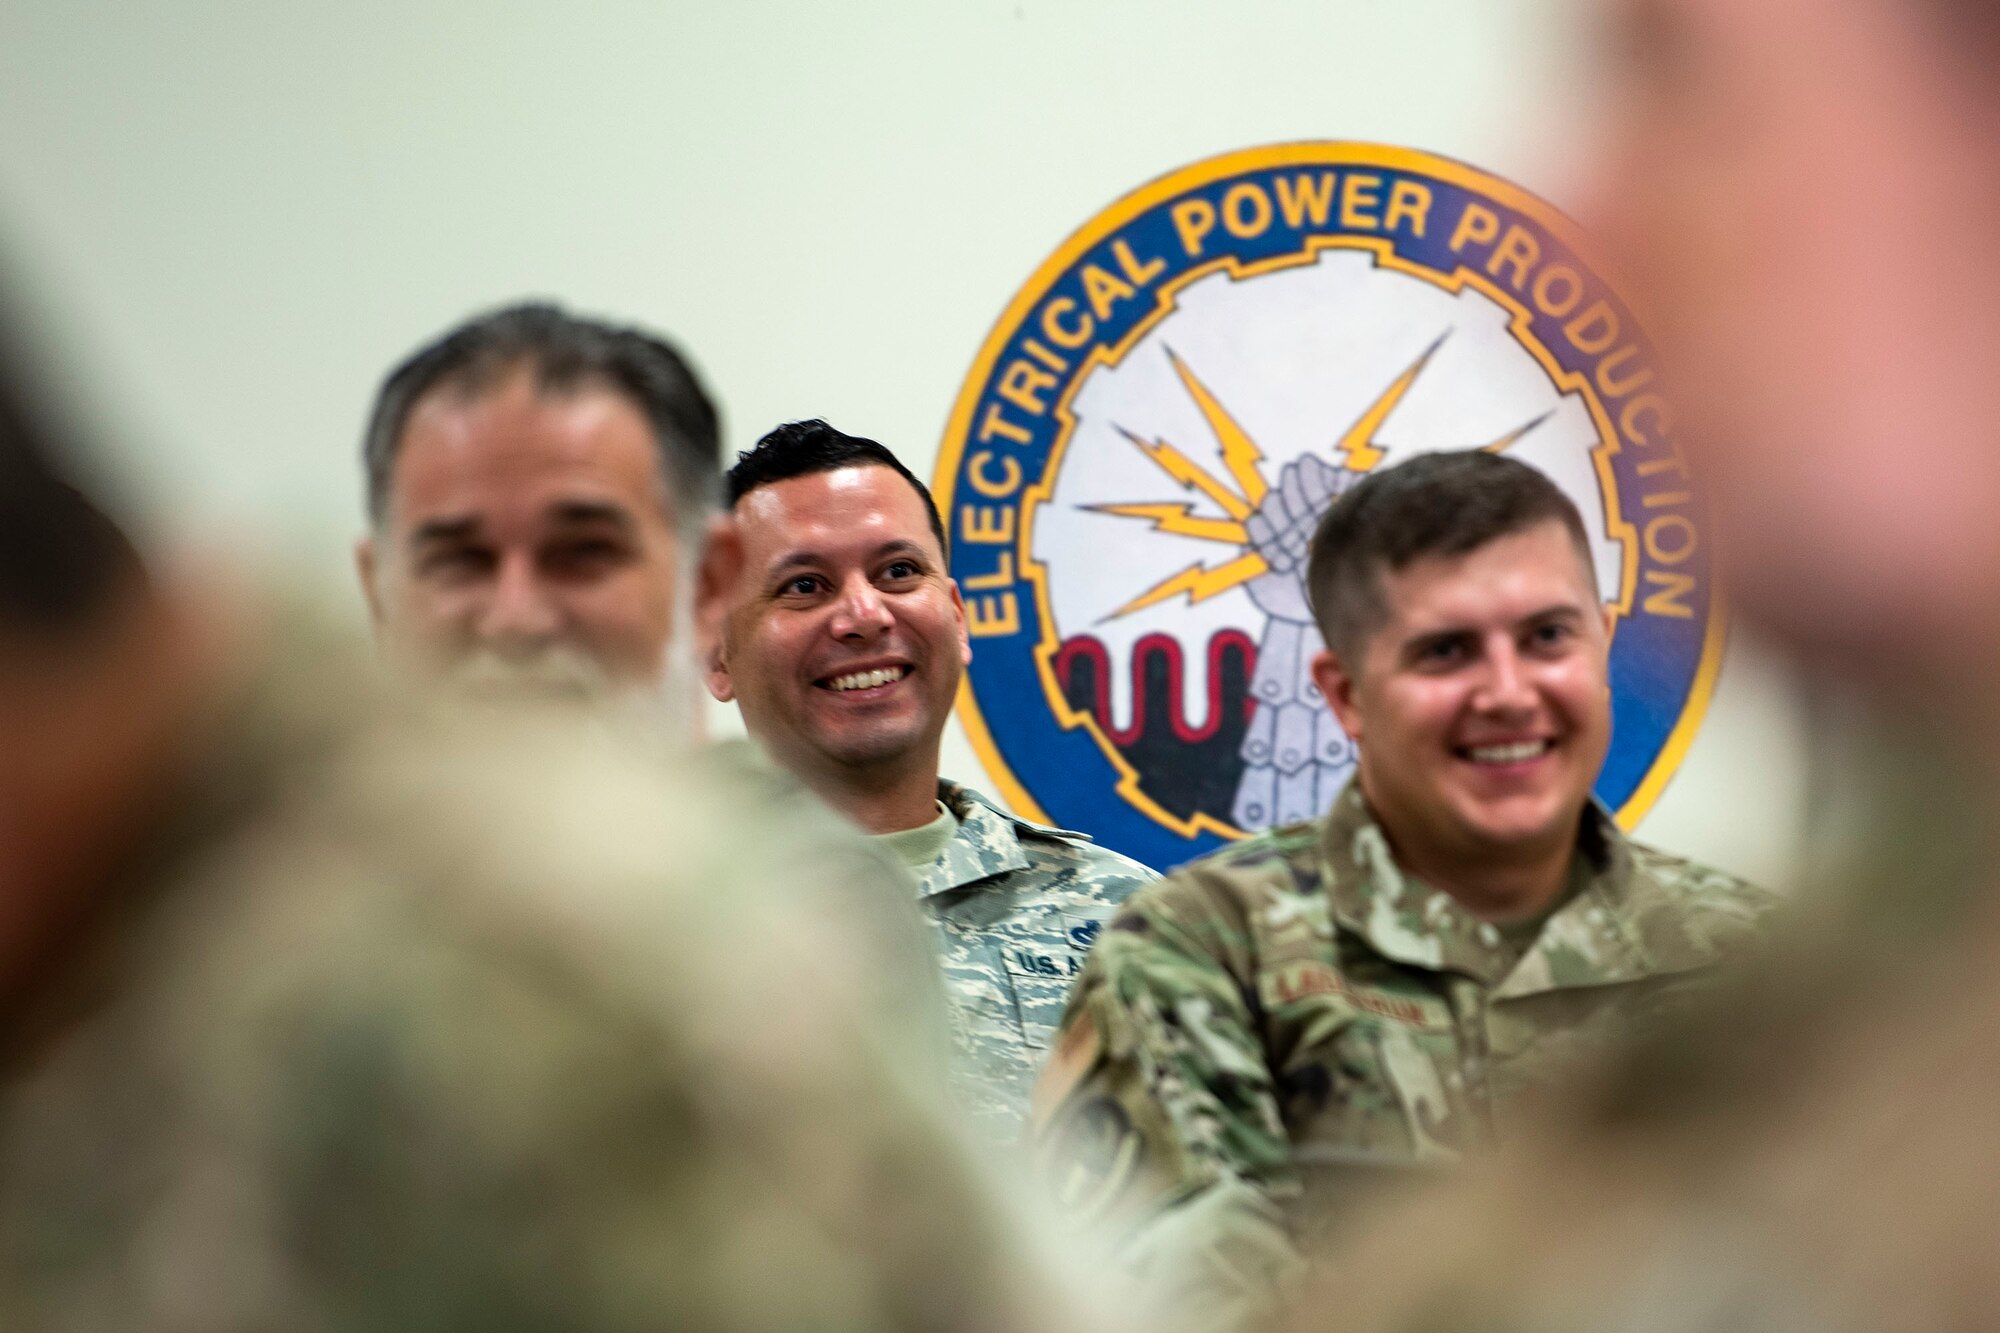 Airmen from the 23d Civil Engineer Squadron share a smile during resiliency training Sept. 10, 2019, at Moody Air Force Base, Ga. The event was hosted by the 23d Wing chaplain, and served as an interactive experience for Airmen, providing practical approaches they can use regularly to improve the resiliency culture in their squadrons. (U.S. Air Force photo by Senior Airman Erick Requadt)